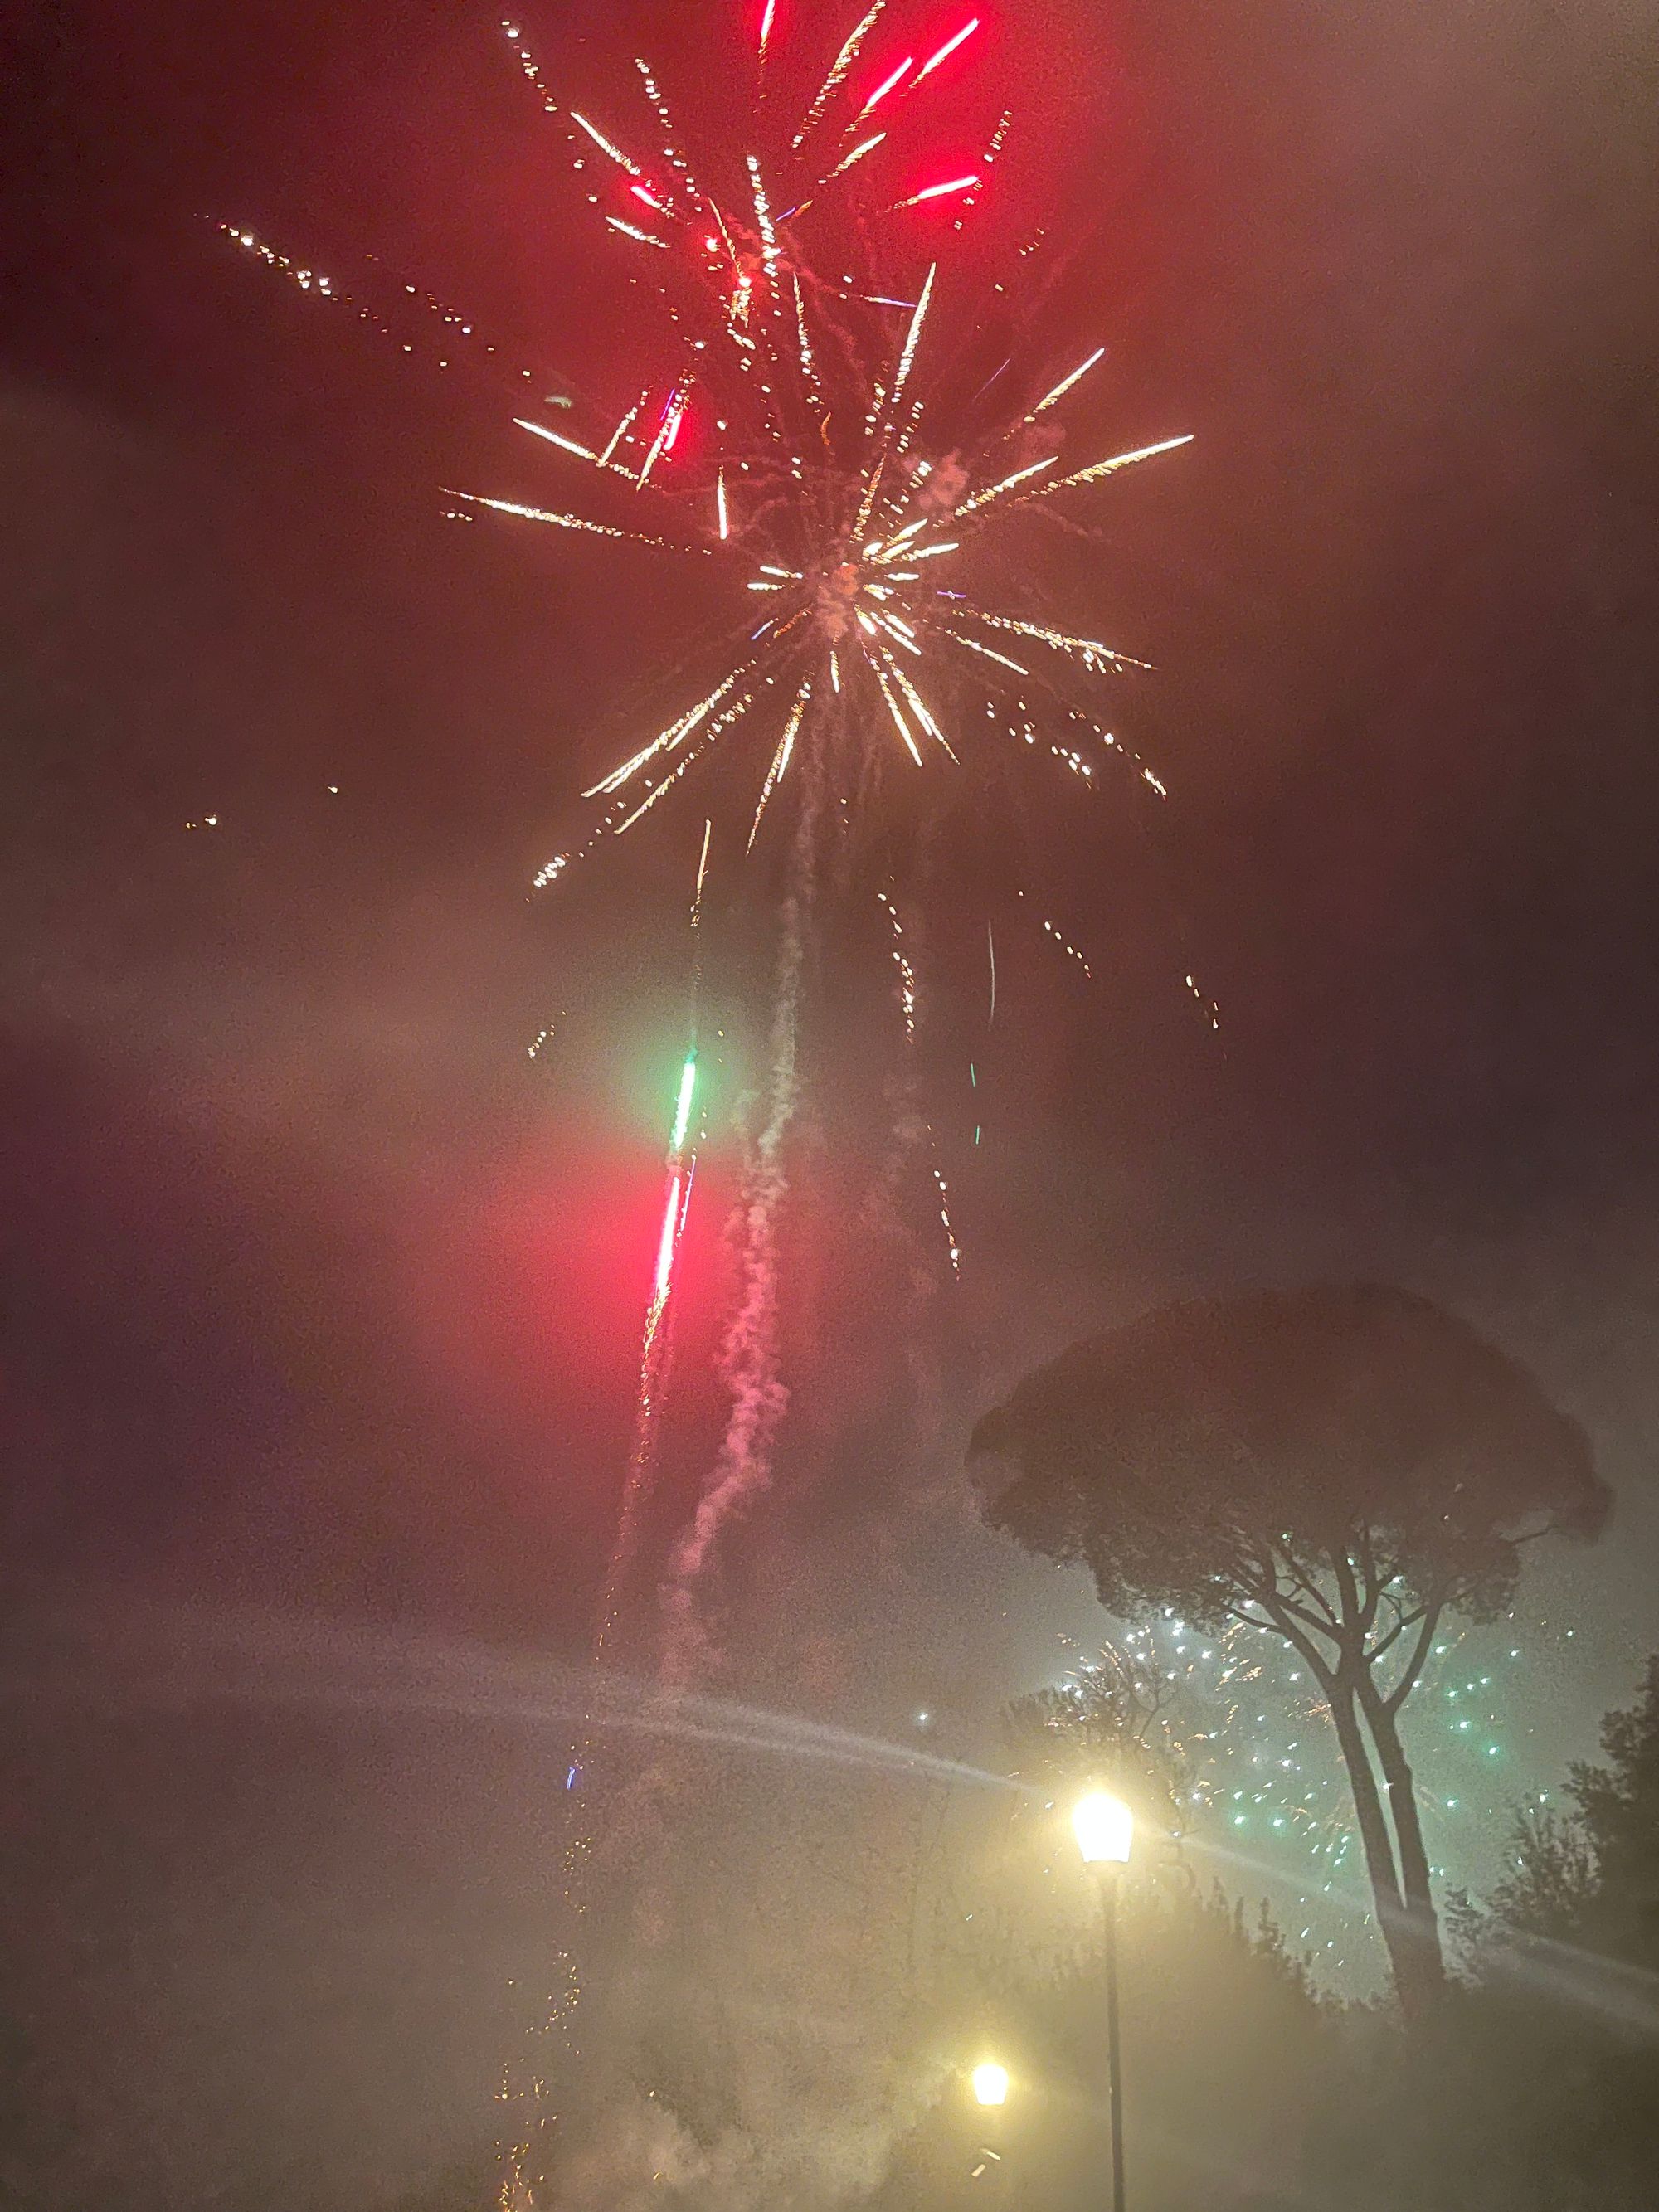 Fireworks exploding low in the sky, against a smoky background, with a tree barely visible in the mist.